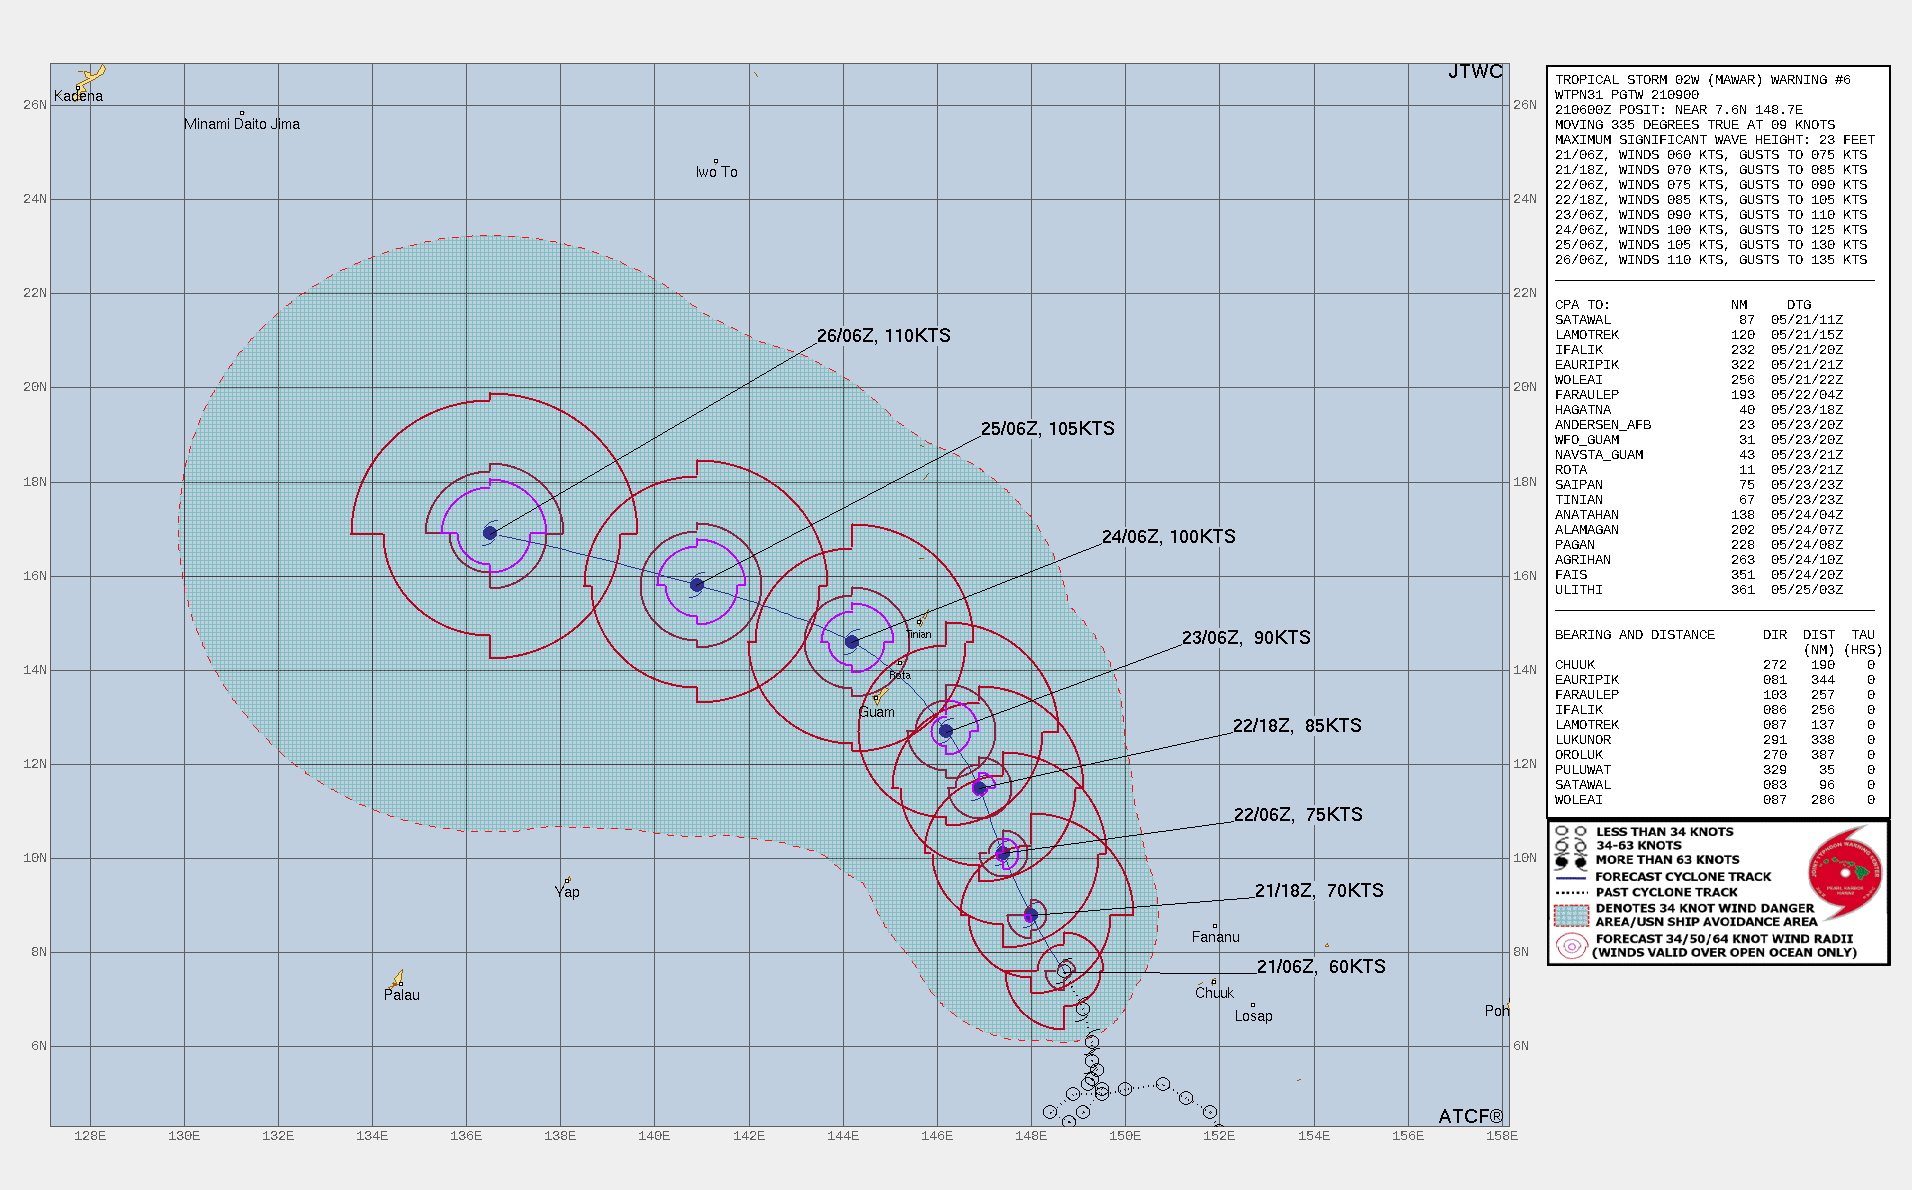 FORECAST REASONING.  SIGNIFICANT FORECAST CHANGES: THERE ARE NO SIGNIFICANT CHANGES TO THE FORECAST FROM THE PREVIOUS WARNING.  FORECAST DISCUSSION: TS 02W (MAWAR) HAS RAPIDLY INTENSIFIED OVER THE PAST SIX HOURS. AS THE SYSTEM CONTINUES TO PICK UP SPEED UNDER THE STEERING INFLUENCE OF THE NER TO THE EAST, 02W IS FORECAST TO MAINTAIN A GENERALLY NORTH-NORTHWESTWARD TRACK. THE ENVIRONMENT SURROUNDING 02W IS FORECAST TO REMAIN FAVORABLE, CHARACTERIZED BY WARM SSTS AND ROBUST OUTFLOW ALOFT BOTH POLEWARD AND WESTWARD OVERWHELMING THE NEGATIVE AFFECTS OF LIMITED DRY AIR ENTRAINMENT AND MODERATE MID-UPPER LEVEL VERTICAL WIND SHEAR (VWS). AFTER REACHING TYPHOON STRENGTH BY TAU 12, THE SYSTEM WILL CONTINUE TO DEVELOP, FUELED BY THE AFOREMENTIONED ROBUST OUTFLOW ALOFT AND WARM SSTS. NEAR TAU 72, THE NER TO THE EAST REORIENTS AND BUILDS FURTHER NORTHEAST OF THE SYSTEM, FORCING IT TO STEADY UP ON A GENERALLY WEST-NORTHWESTWARD COURSE AFTER PASSING NORTH OF GUAM. BY TAU 120, NOW OVER THE WARM WATERS AND DEEP OCEAN HEAT CONTENT (OHC) OF THE PHILIPPINE SEA, 02W WILL REACH A PEAK INTENSITY OF 110KTS AS IT CONTINUES WEST-NORTHWESTWARD.